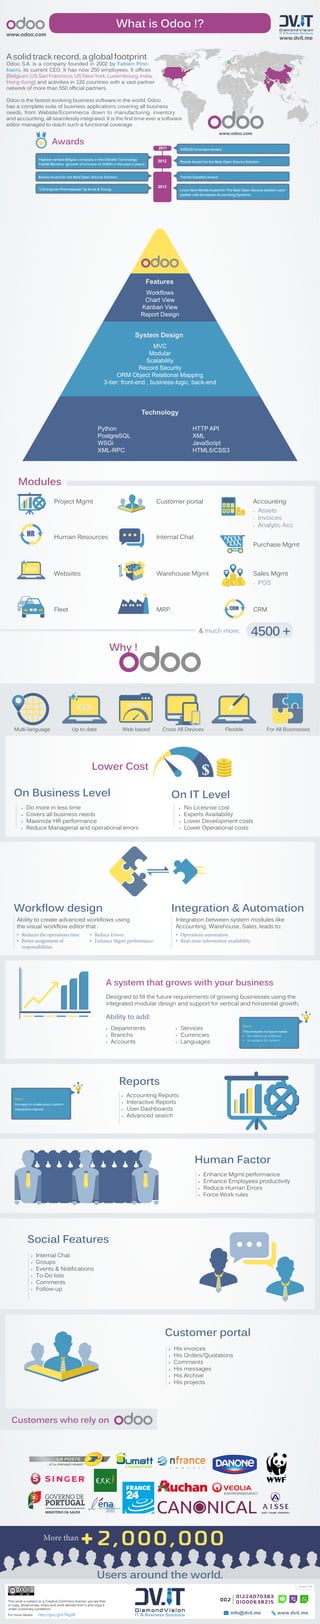 www.dvit.me
www.odoo.com
What is Odoo !?
Human Factor
Social Features
Customer portal
Modules
Reports
•	 Assets
•	 Invoices
•	 Analytic Acc
•	 POS
AccountingCustomer portalProject Mgmt
Sales MgmtWarehouse MgmtWebsites
Purchase Mgmt
Internal ChatHuman Resources
CRMMRPFleet
& much more.
CRM
HR
Why !
On IT LevelOn Business Level
•	 No Licesnse cost
•	 Experts Availability
•	 Lower Development costs
•	 Lower Operational costs
•	 Do more in less time
•	 Covers all business needs
•	 Maximize HR performance
•	 Reduce Managerial and operational errors
Lower Cost
Designed to fill the future requirements of growing businesses using the
integrated modular design and support for vertical and horizental growth.
A system that grows with your business
A solid track record, a global footprint
Odoo S.A. is a company founded in 2002 by Fabien Pinc-
kaers, its current CEO. It has now 250 employees, 6 offices
(Belgium, US San Francisco, US New York, Luxembourg, India,
Hong Kong) and activities in 120 countries with a vast partner
network of more than 550 official partners.
Odoo is the fastest evolving business software in the world. Odoo
has a complete suite of business applications covering all business
needs, from Website/Ecommerce down to manufacturing, inventory
and accounting, all seamlessly integrated. It is the first time ever a software
editor managed to reach such a functional coverage.
Awards
INSEAD Innovator Award.
Highest-ranked Belgian company in the Deloitte Technology
Fast50 Benelux (growth of turnover of 1549% in the past 5 years).
Trends Gazelles Award.
“L’Entreprise Prometteuse” by Ernst & Young.
Bossie Award for the Best Open Source Solution.
Bossie Award for the Best Open Source Solution.
Linux New Media Award for The Best Open Source solution com-
patible with European Accounting Systems.
2011
2012
2013
www.odoo.com
4500 +
Features
Workflows
Chart View
Kanban View
Report Design
System Design
MVC
Modular
Scalability
Record Security
ORM Object Relational Mapping
3-tier: front-end , business-logic, back-end
Technology
Python
PostgreSQL
WSGi
XML-RPC
HTTP API
XML
JavaScript
HTML5/CSS3
Multi-language Up to date Web based Cross All Devices Flexible For All Businesses
Ability to create advanced workflows using
the visual workflow editor that :
•	 Reduces the operations time
•	 Better assignment of
responsibilities
•	 Reduce Errors
•	 Enhance Mgmt performance
Workflow design
Integration between system modules like
Accounting, Warehouse, Sales, leads to:
•	 Operations automation.
•	 Real-time information availability.
Integration & Automation
Note !
This ensures no future need:
•	 for additional software
•	 to replace the system
Note !
It›s easy to create your custom
interactive reports.
•	 Departments
•	 Branchs
•	 Accounts
•	 Services
•	 Currencies
•	 Languages
•	 Accounting Reports
•	 Interactive Reports
•	 User Dashboards
•	 Advanced search
•	 Enhance Mgmt performance
•	 Enhance Employees productivity
•	 Reduce Human Errors
•	 Force Work rules
•	 Internal Chat
•	 Groups
•	 Events & Notifications
•	 To-Do lists
•	 Comments
•	 Follow-up
•	 His invoices
•	 His Orders/Quotations
•	 Comments
•	 His messages
•	 His Archive
•	 His projects
Ability to add:
Customers who rely on
More than
2,000,000
www.dvit.me info@dvit.me
01224070383
002 0 1 0 0 0 6 3 8 2 1 5This work is subject to a Creative Commons license, you are free
to copy, disseminate, share and work derived from it and copy it
under customary conditions.
For more details: http://goo.gl/eTRg2B
Version: 1.0
Users around the world.
 